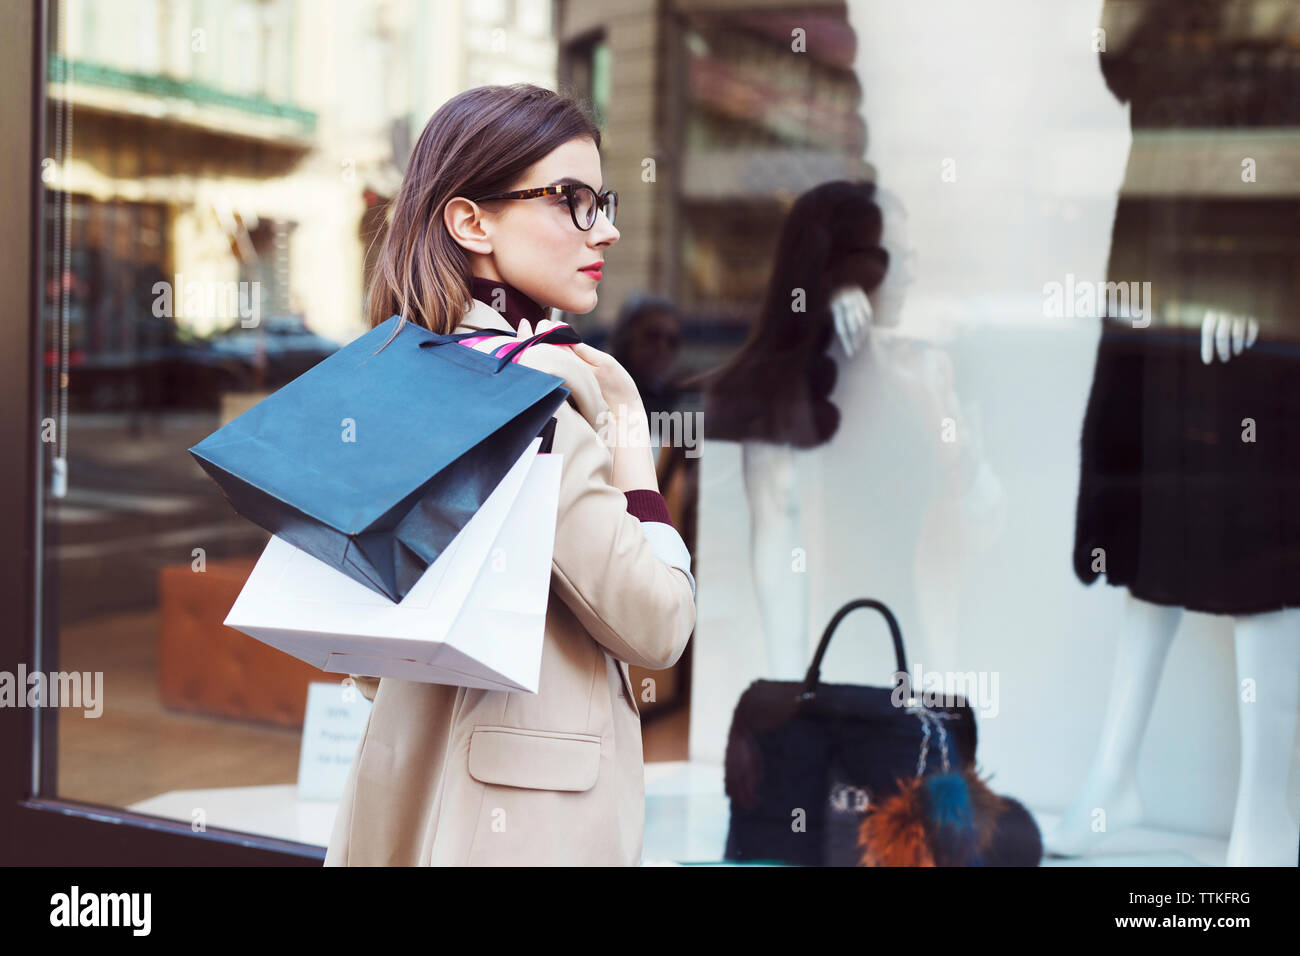 Woman with shopping bags looking in shop window Stock Photo